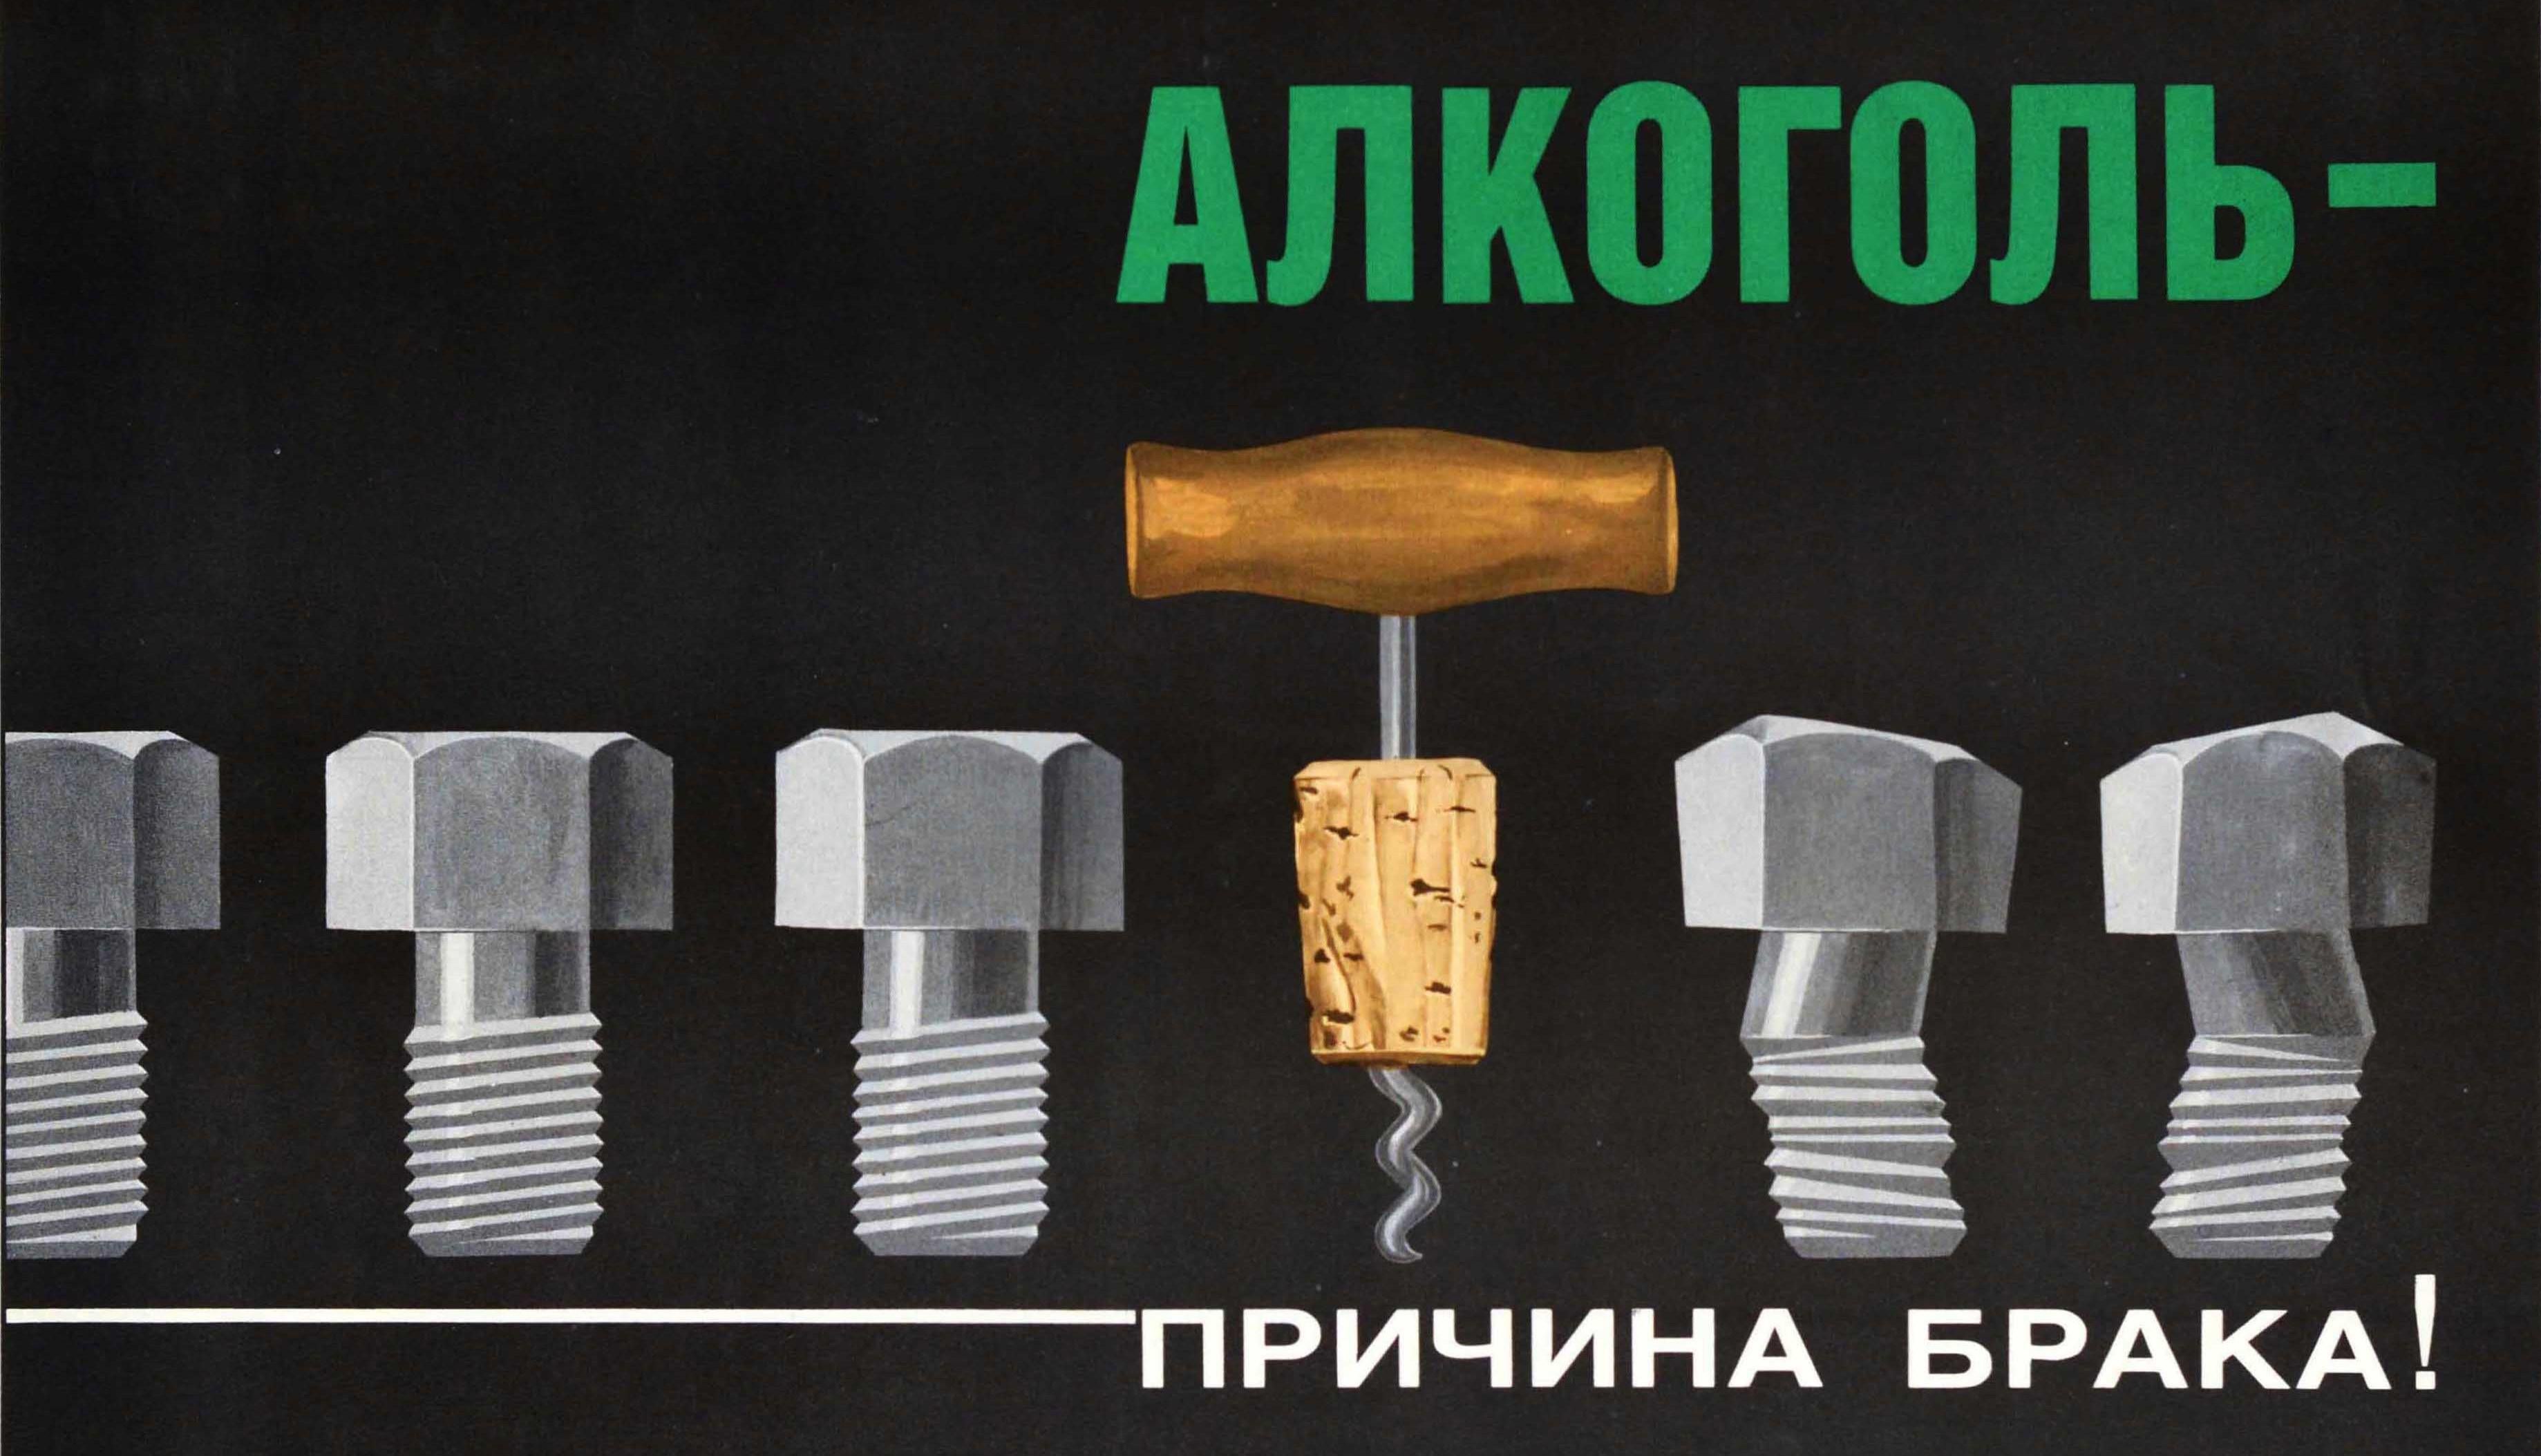 Original vintage Soviet anti-alcoholism propaganda poster - Alcohol is the cause of defective goods! Great design depicting a row of screws in a production line with a corkscrew in the centre followed by wonky damaged screws to show the effects of